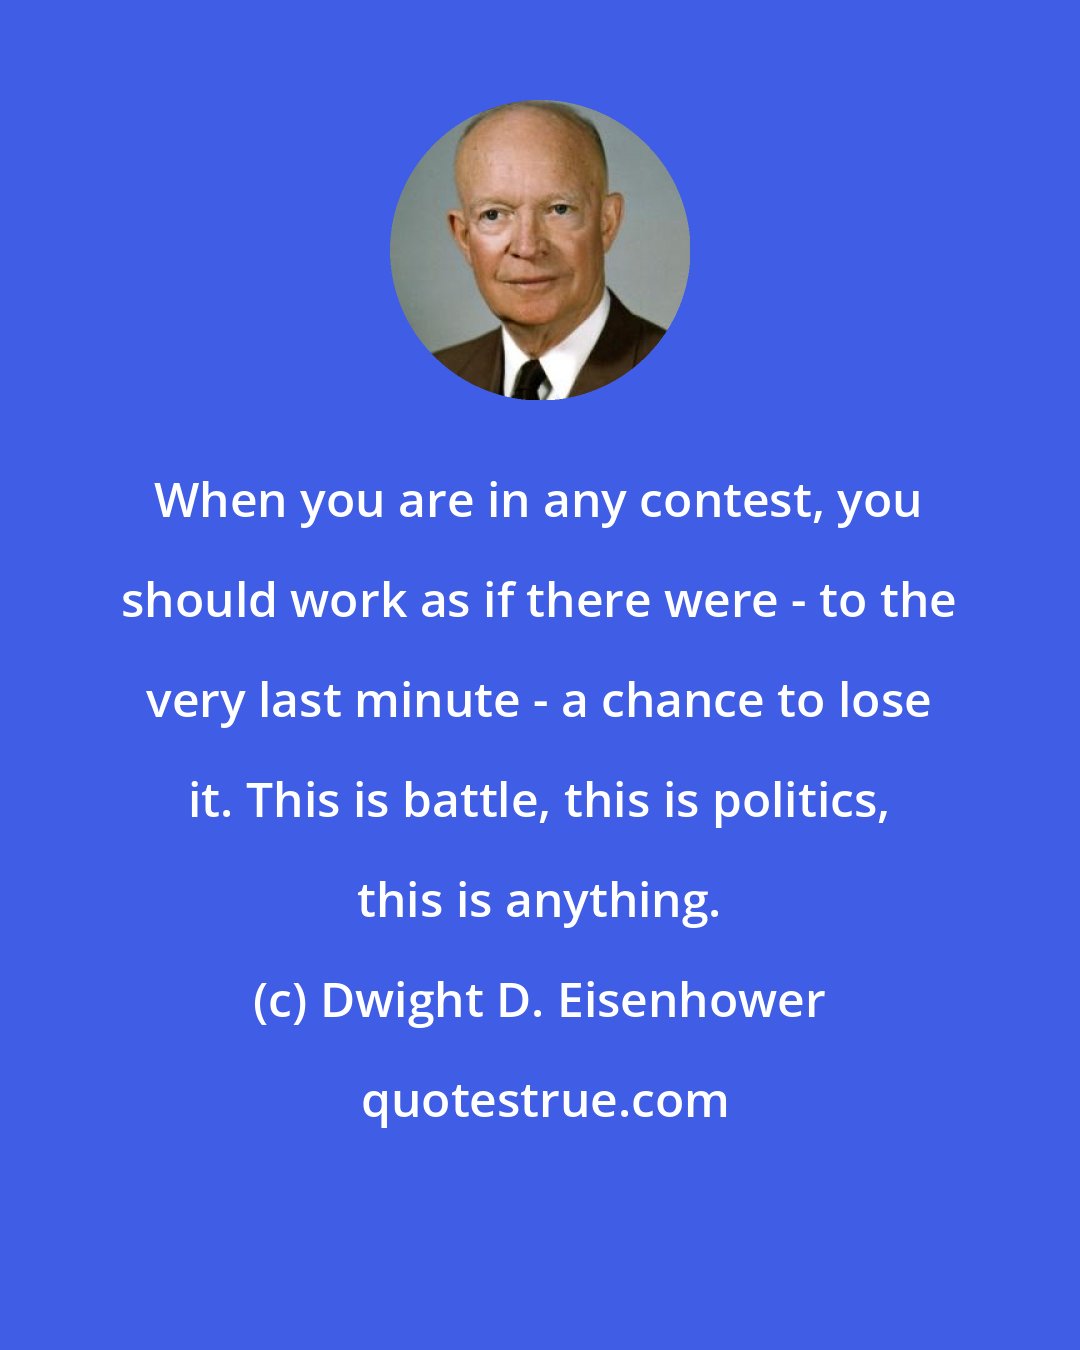 Dwight D. Eisenhower: When you are in any contest, you should work as if there were - to the very last minute - a chance to lose it. This is battle, this is politics, this is anything.